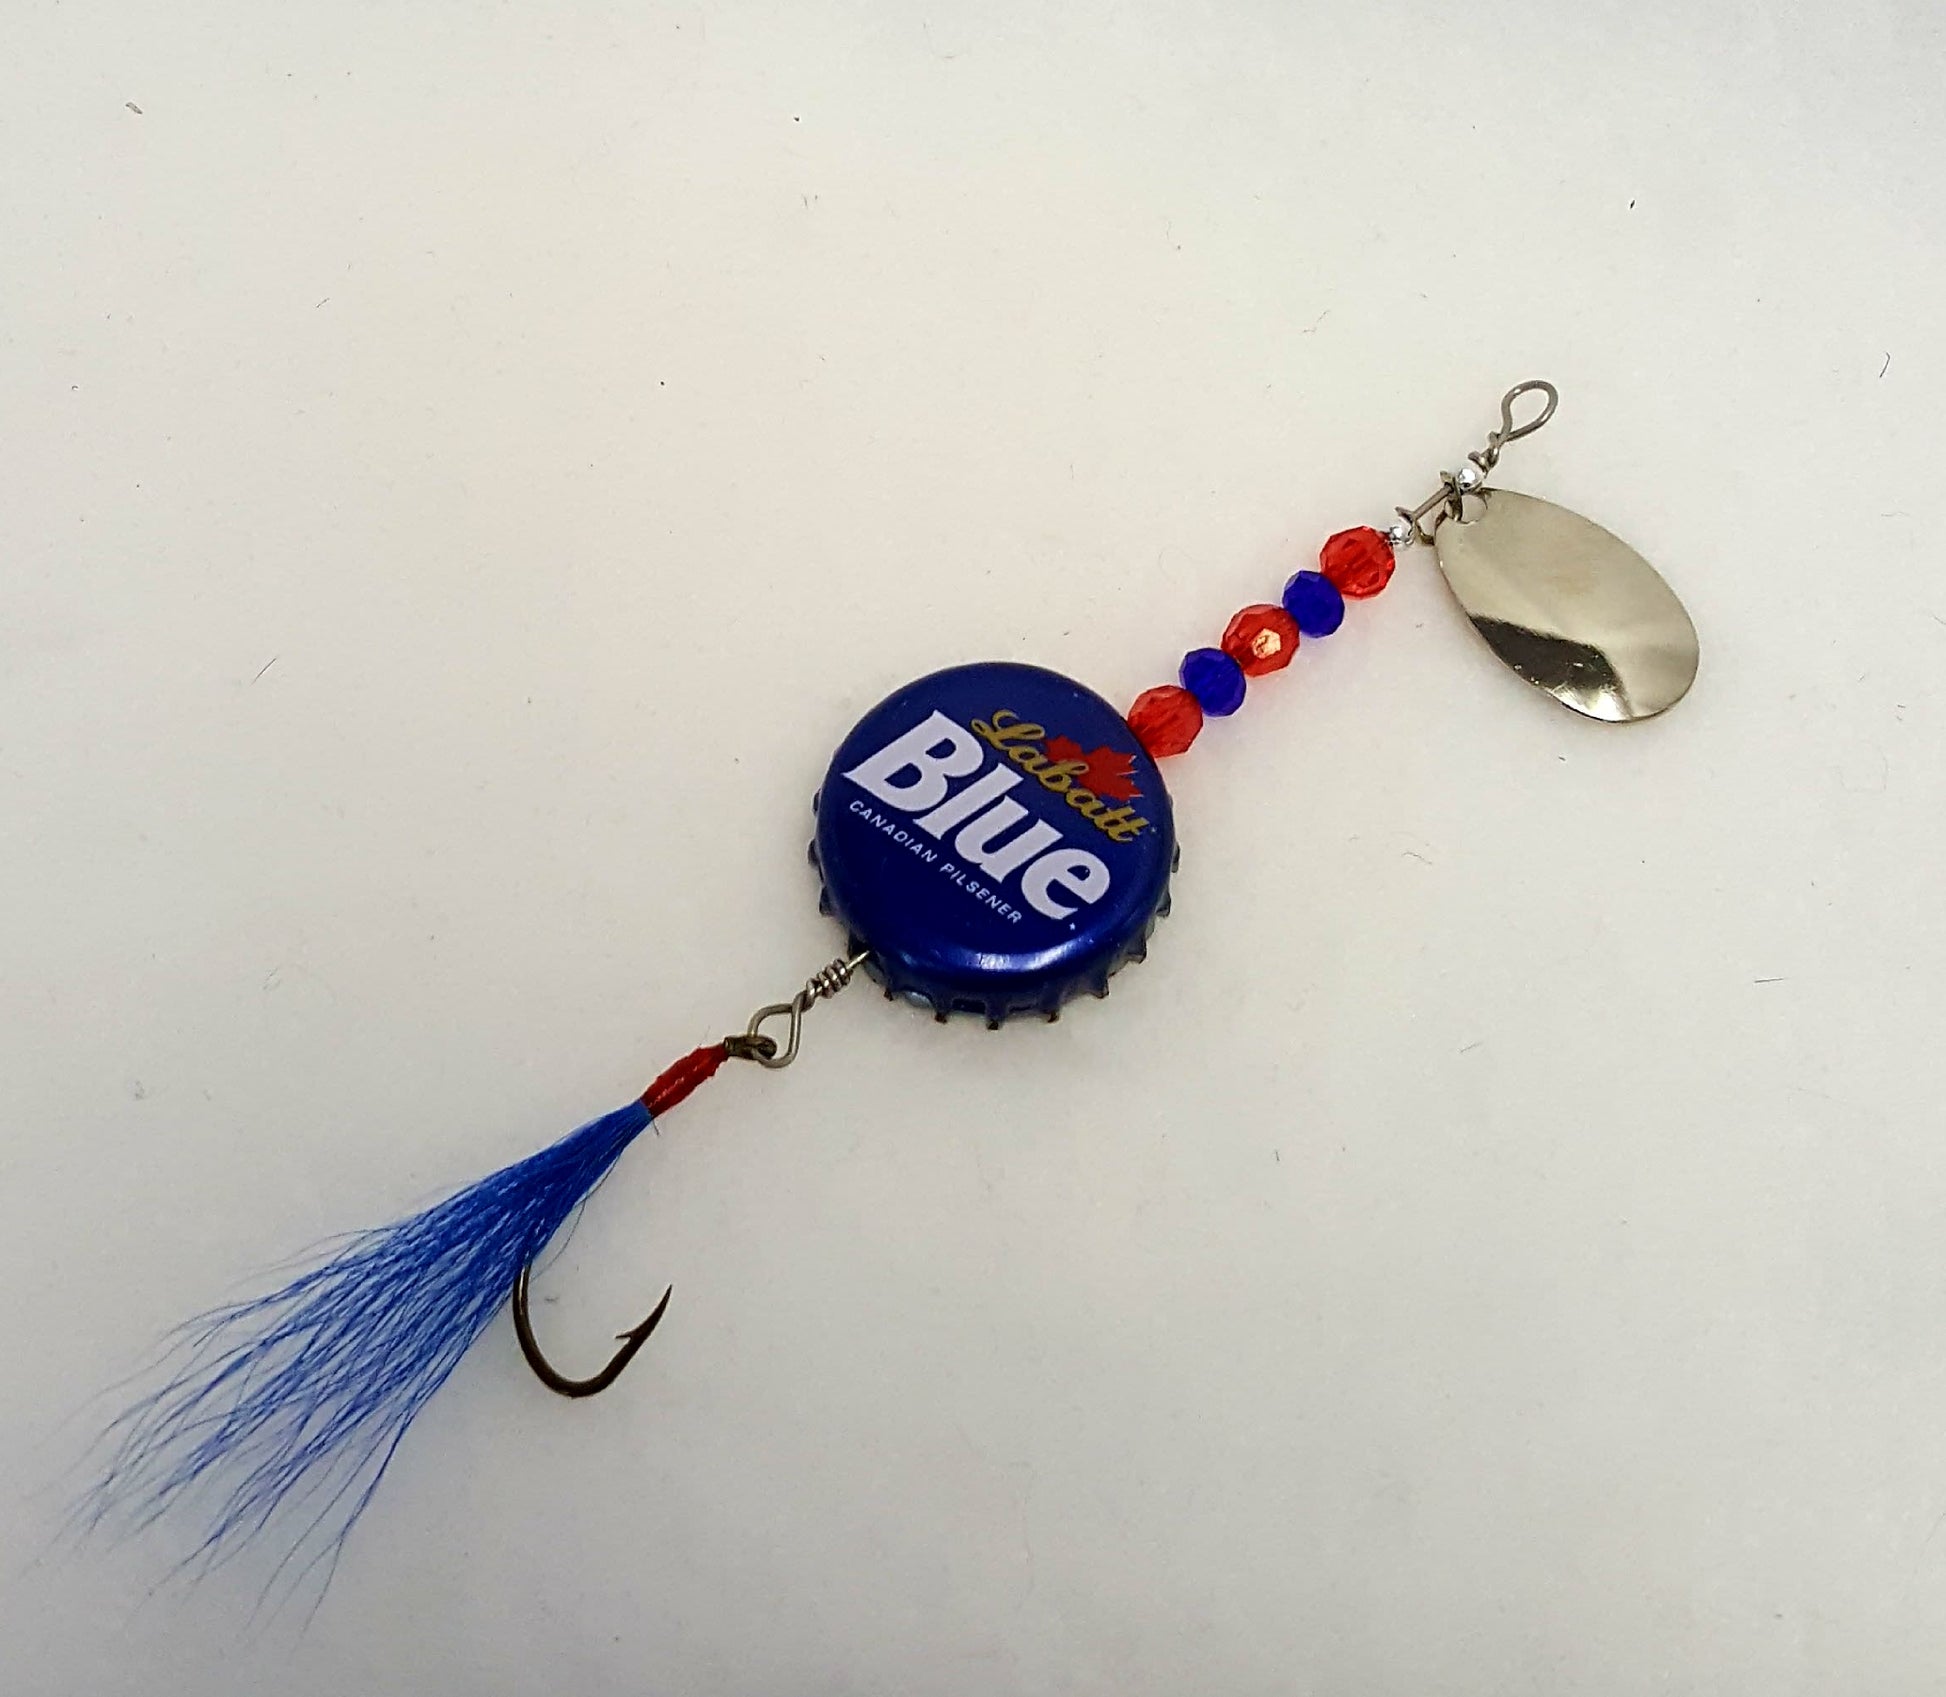 How to Make a Bottle Cap Fishing Lure 